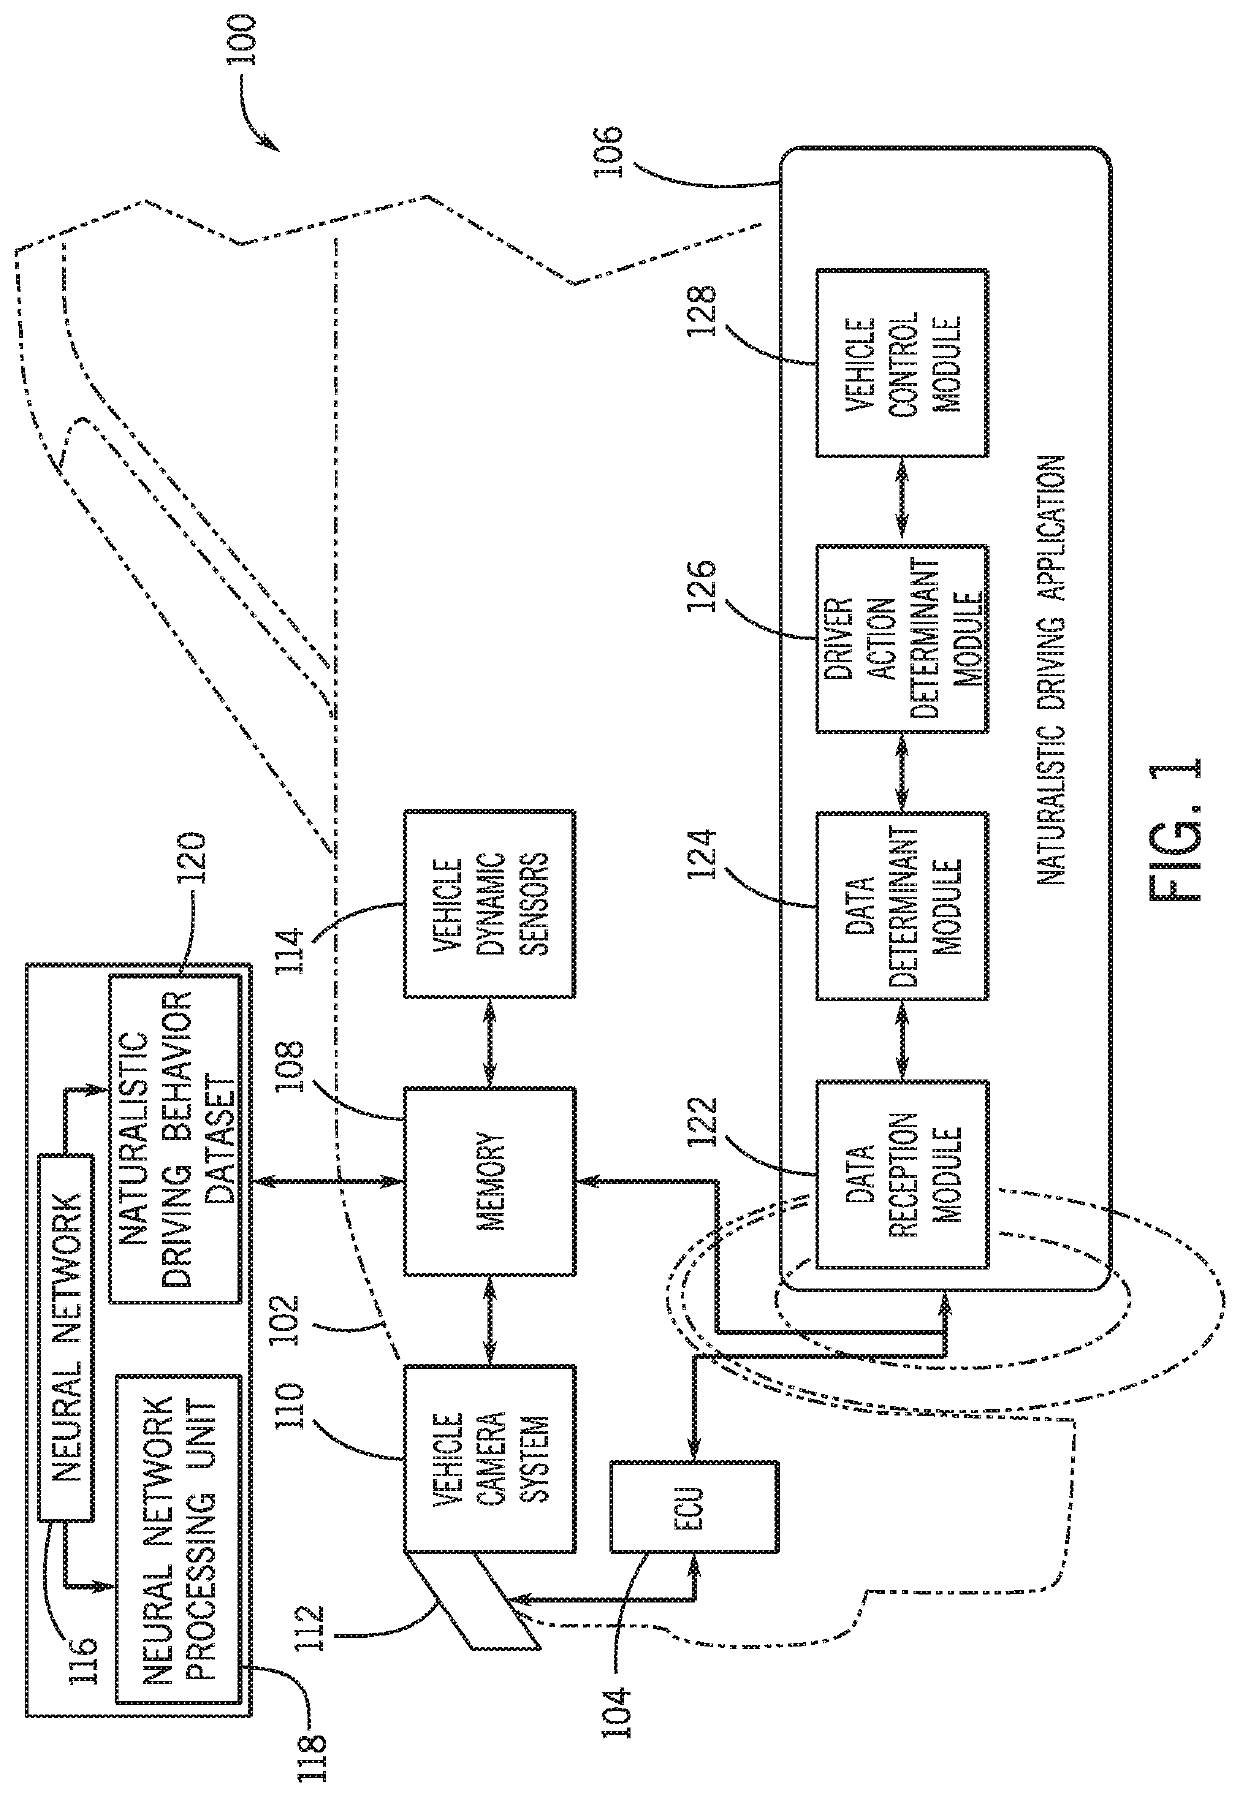 System and method for learning naturalistic driving behavior based on vehicle dynamic data